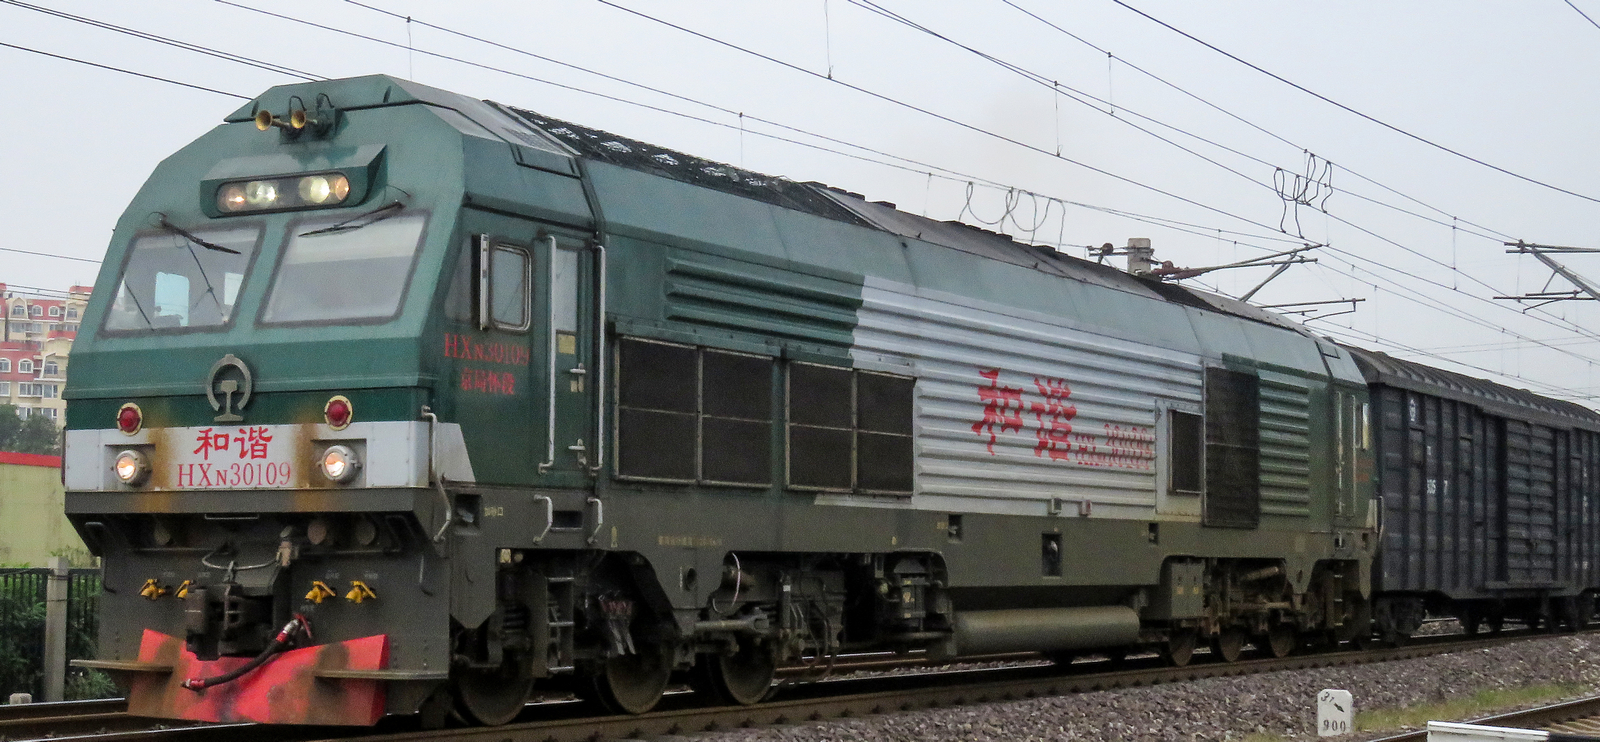 HXN3 0109 in July 2018 at Fengtailu